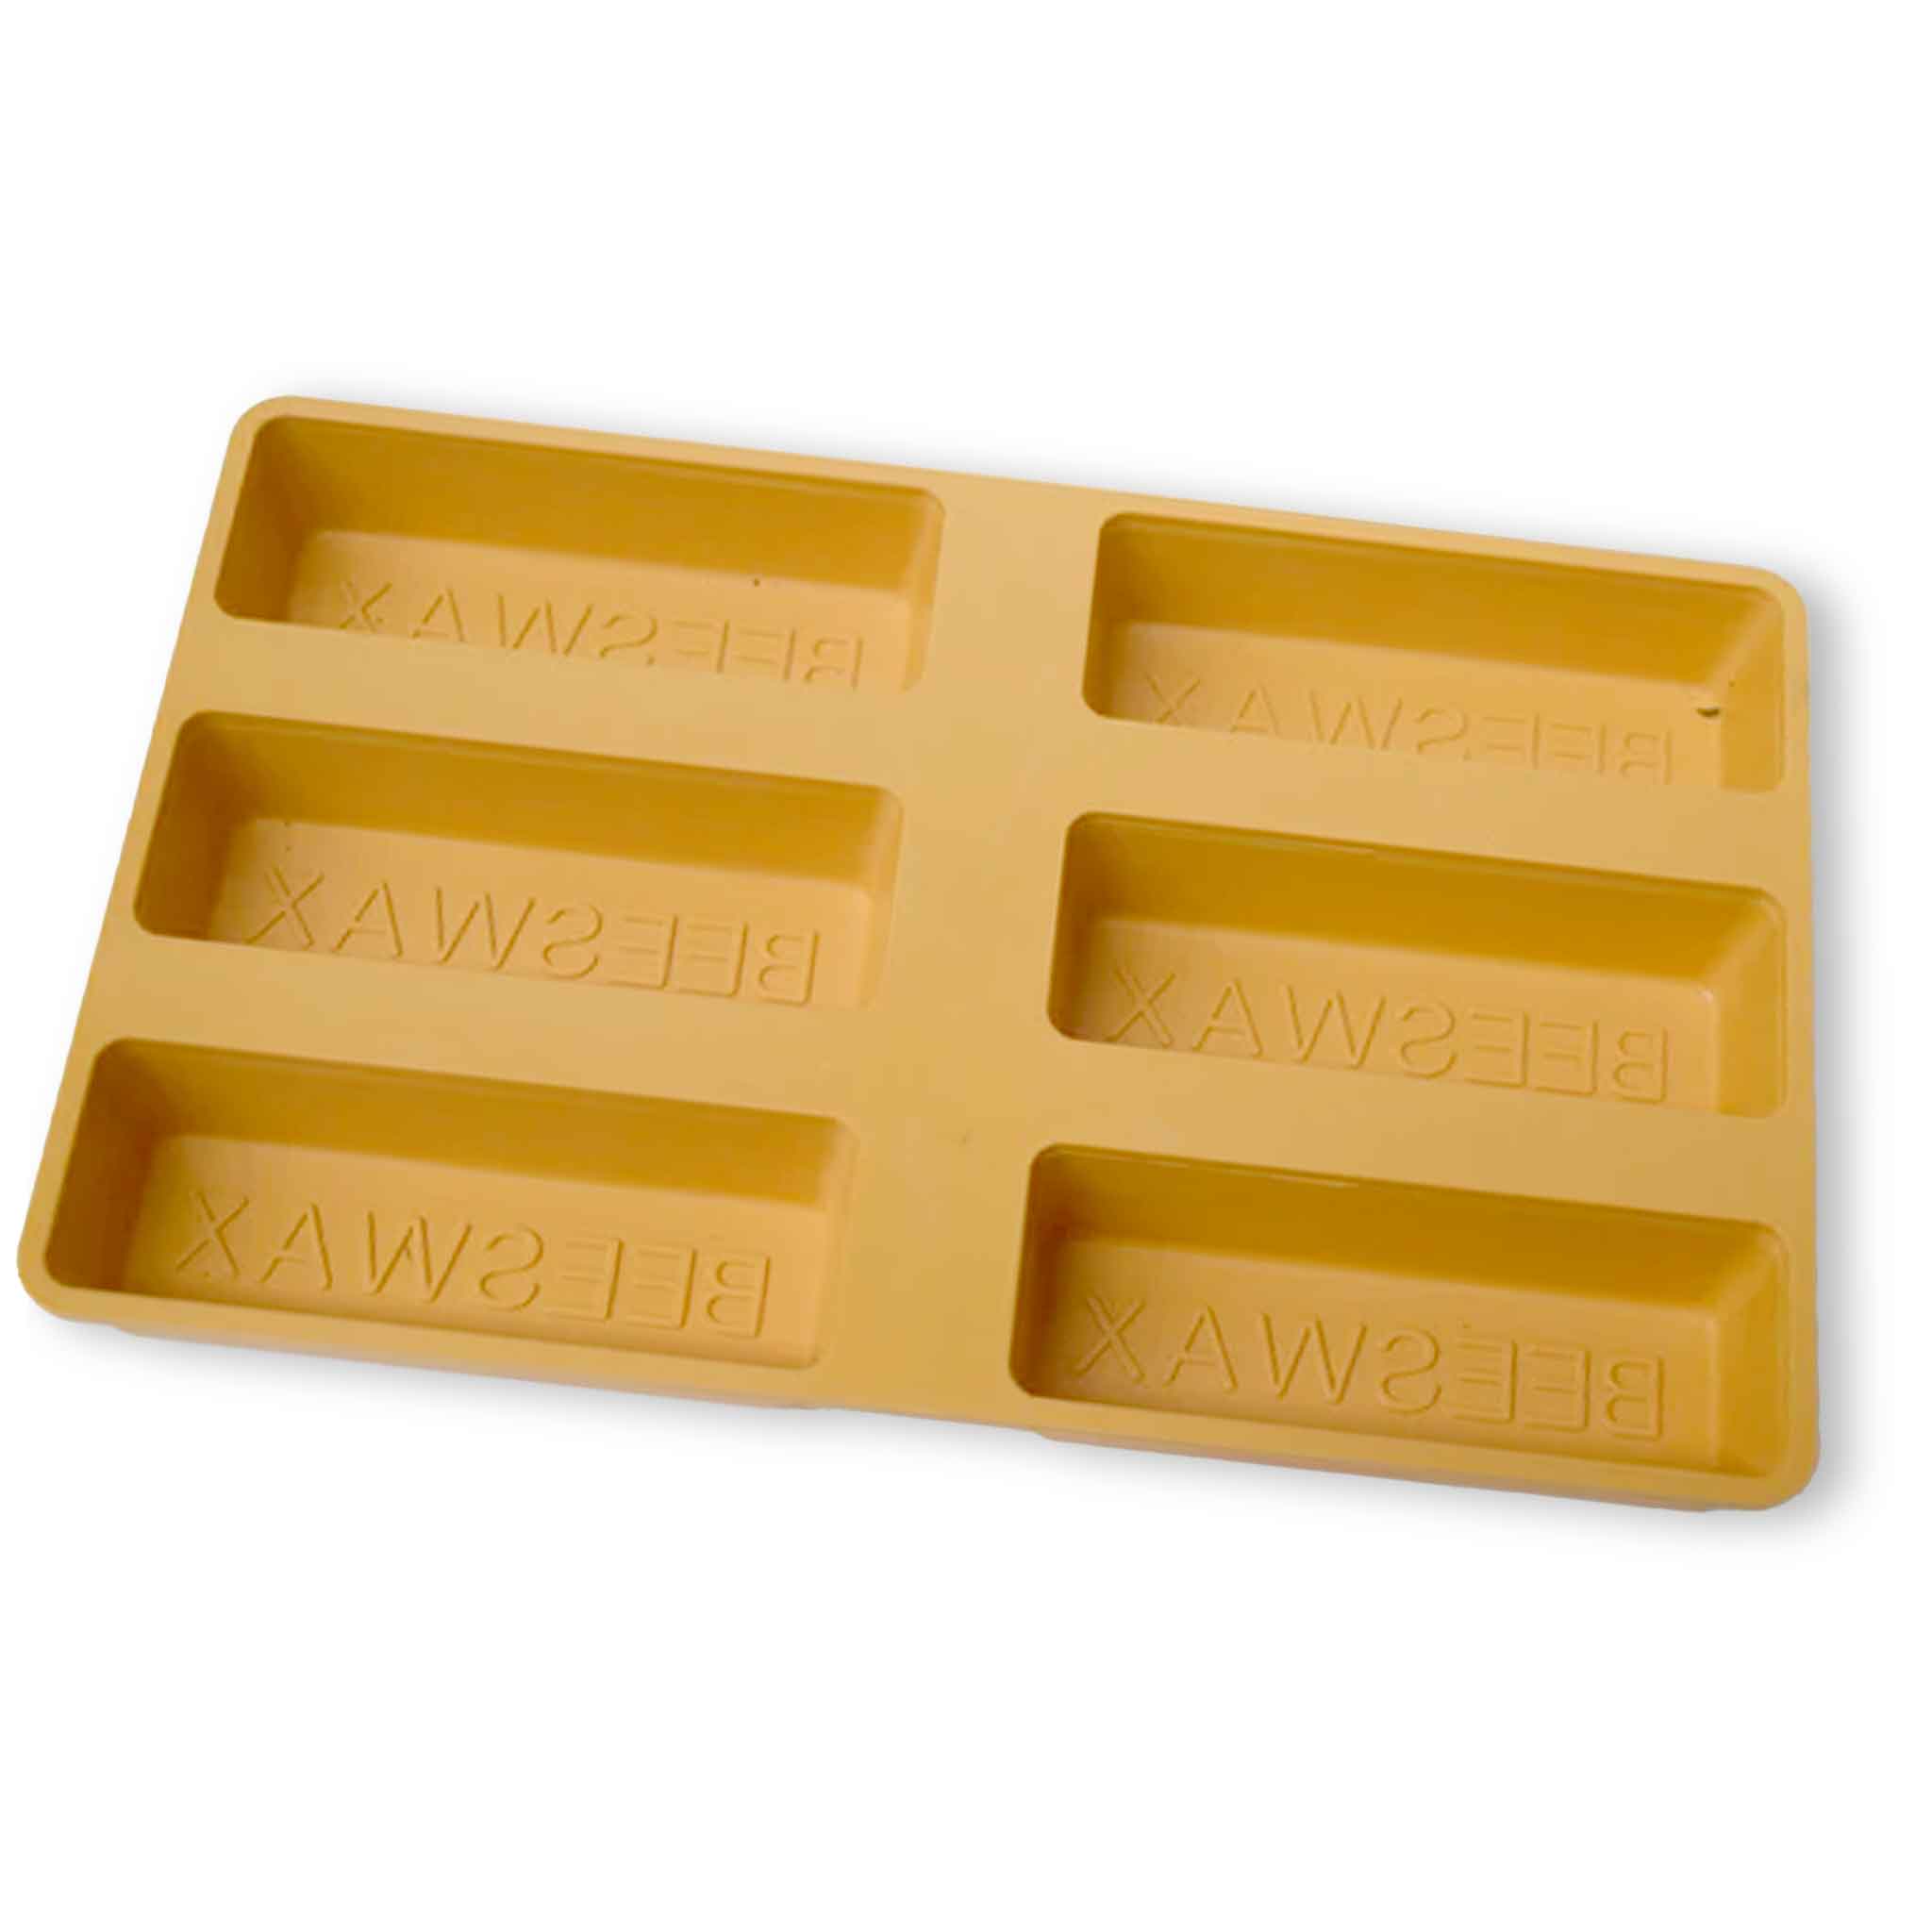 Beeswax Mould Plastic 6 Slabs of 250g - Processing collection by Buzzbee Beekeeping Supplies